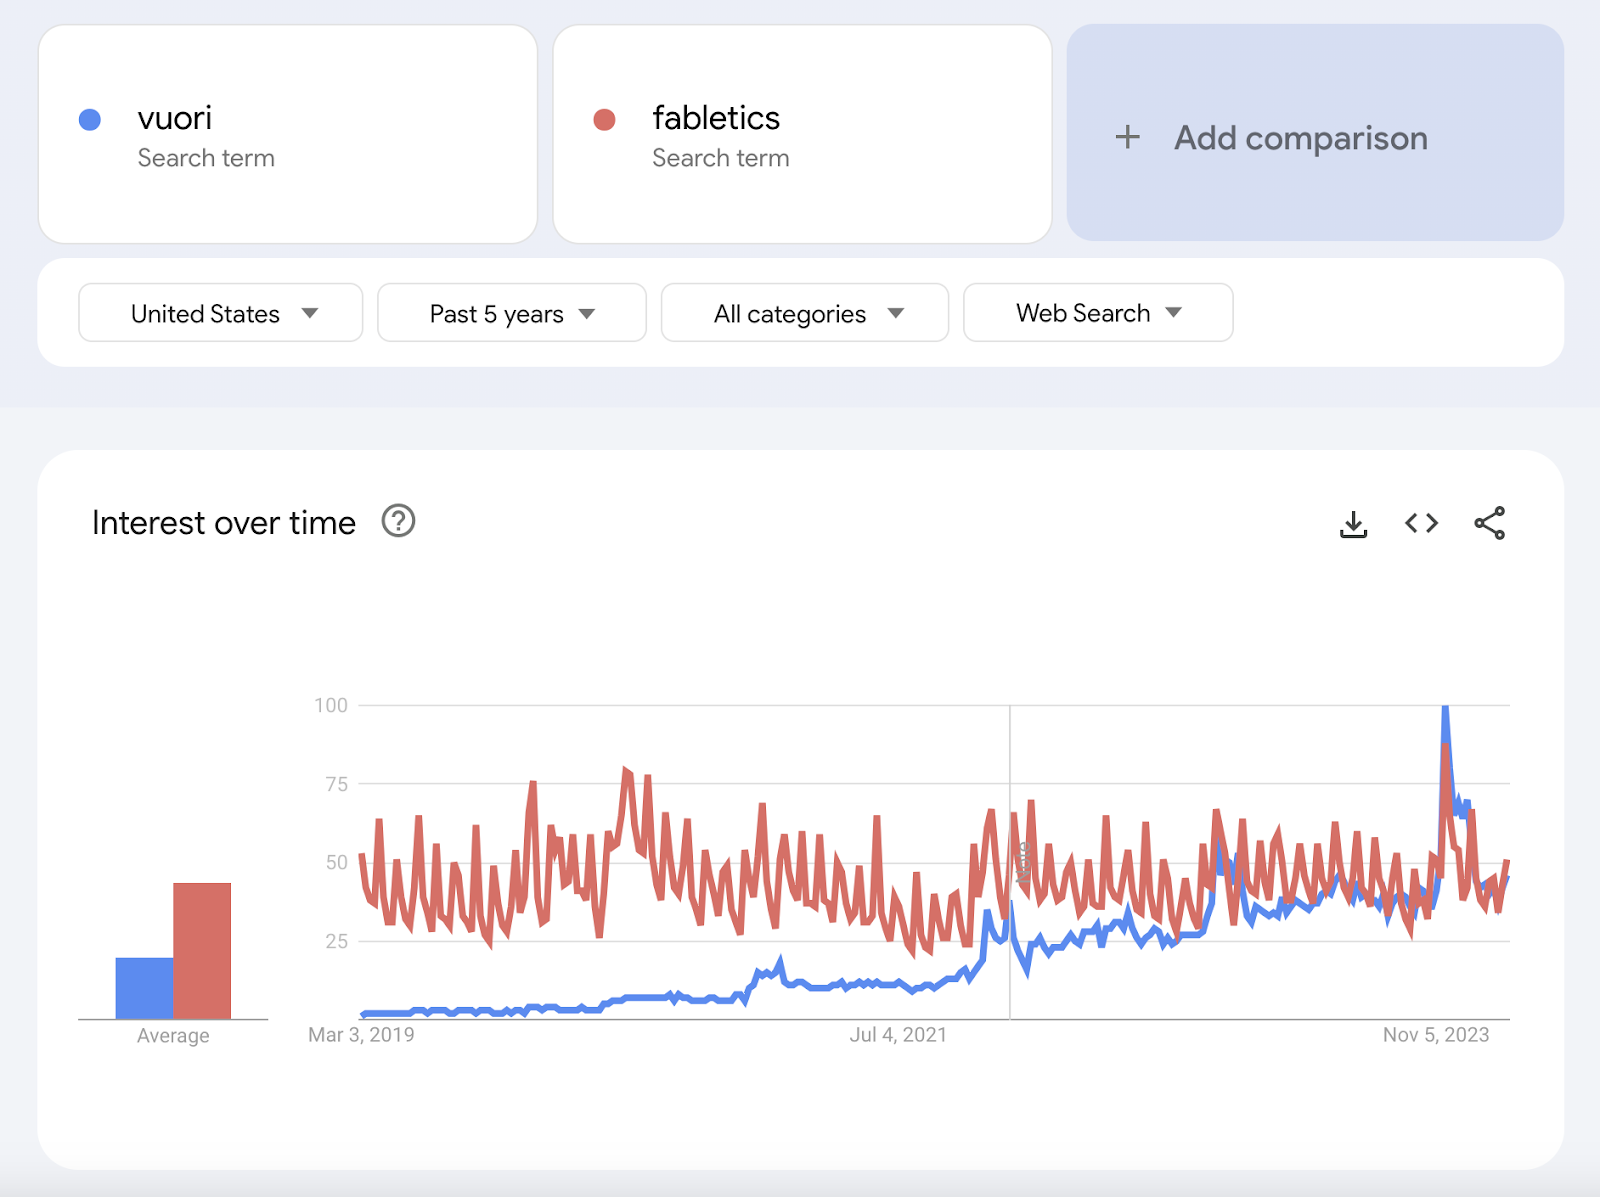 Google Trends "interest implicit    time" graphs showing a examination  betwixt  "Vuori" and "Fabletics" queries